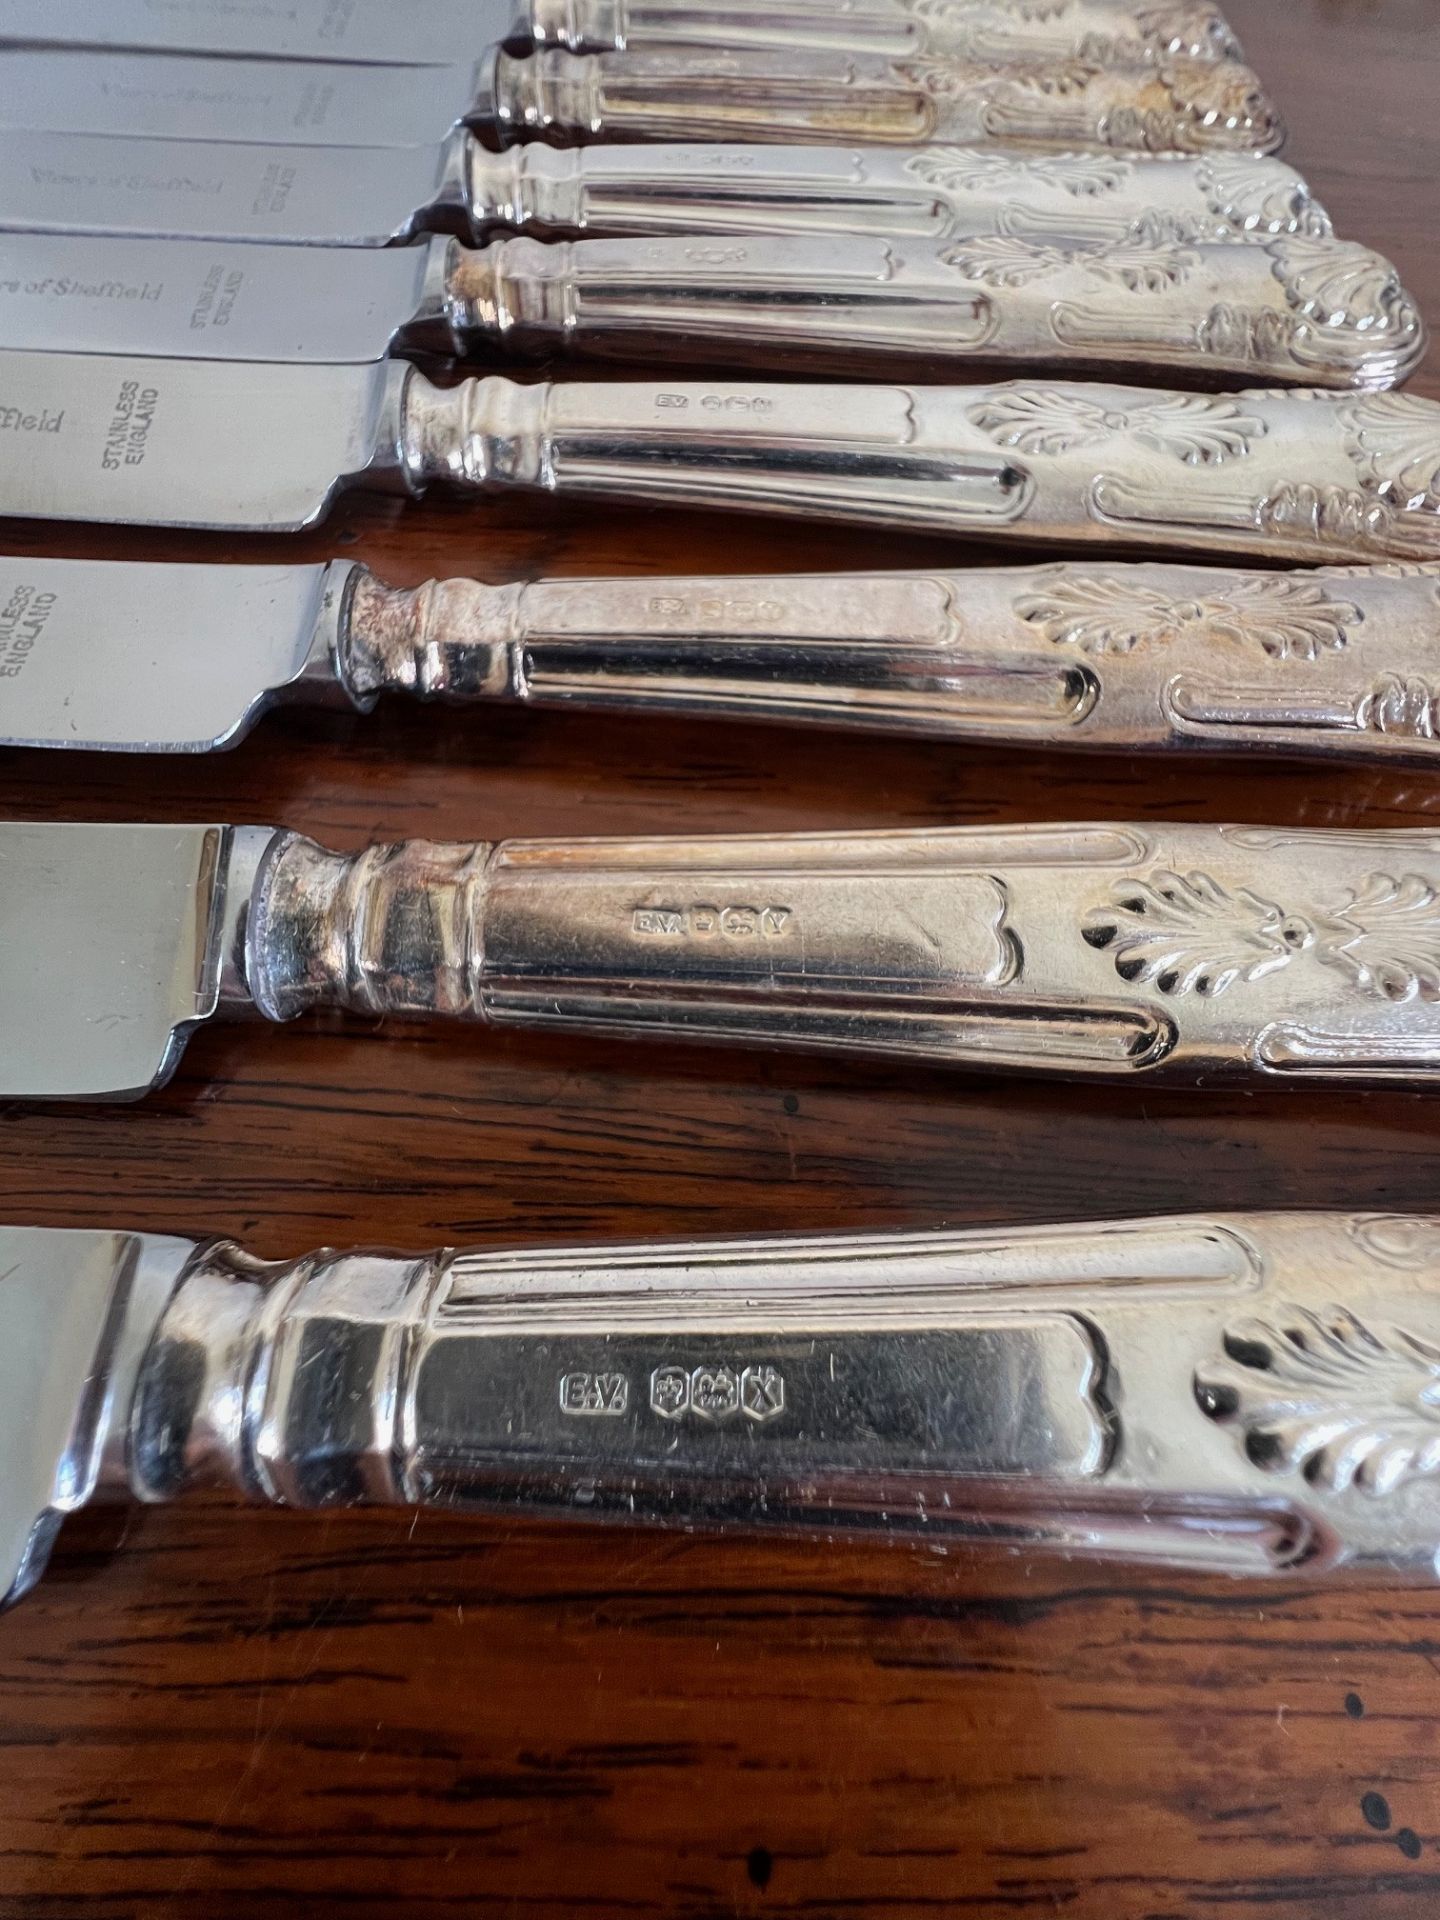 TWELVE VYNERS SECOND-COURSE KNIVES HAVING SILVER HANDLES, SHEFFIELD, 1965 - Image 2 of 2